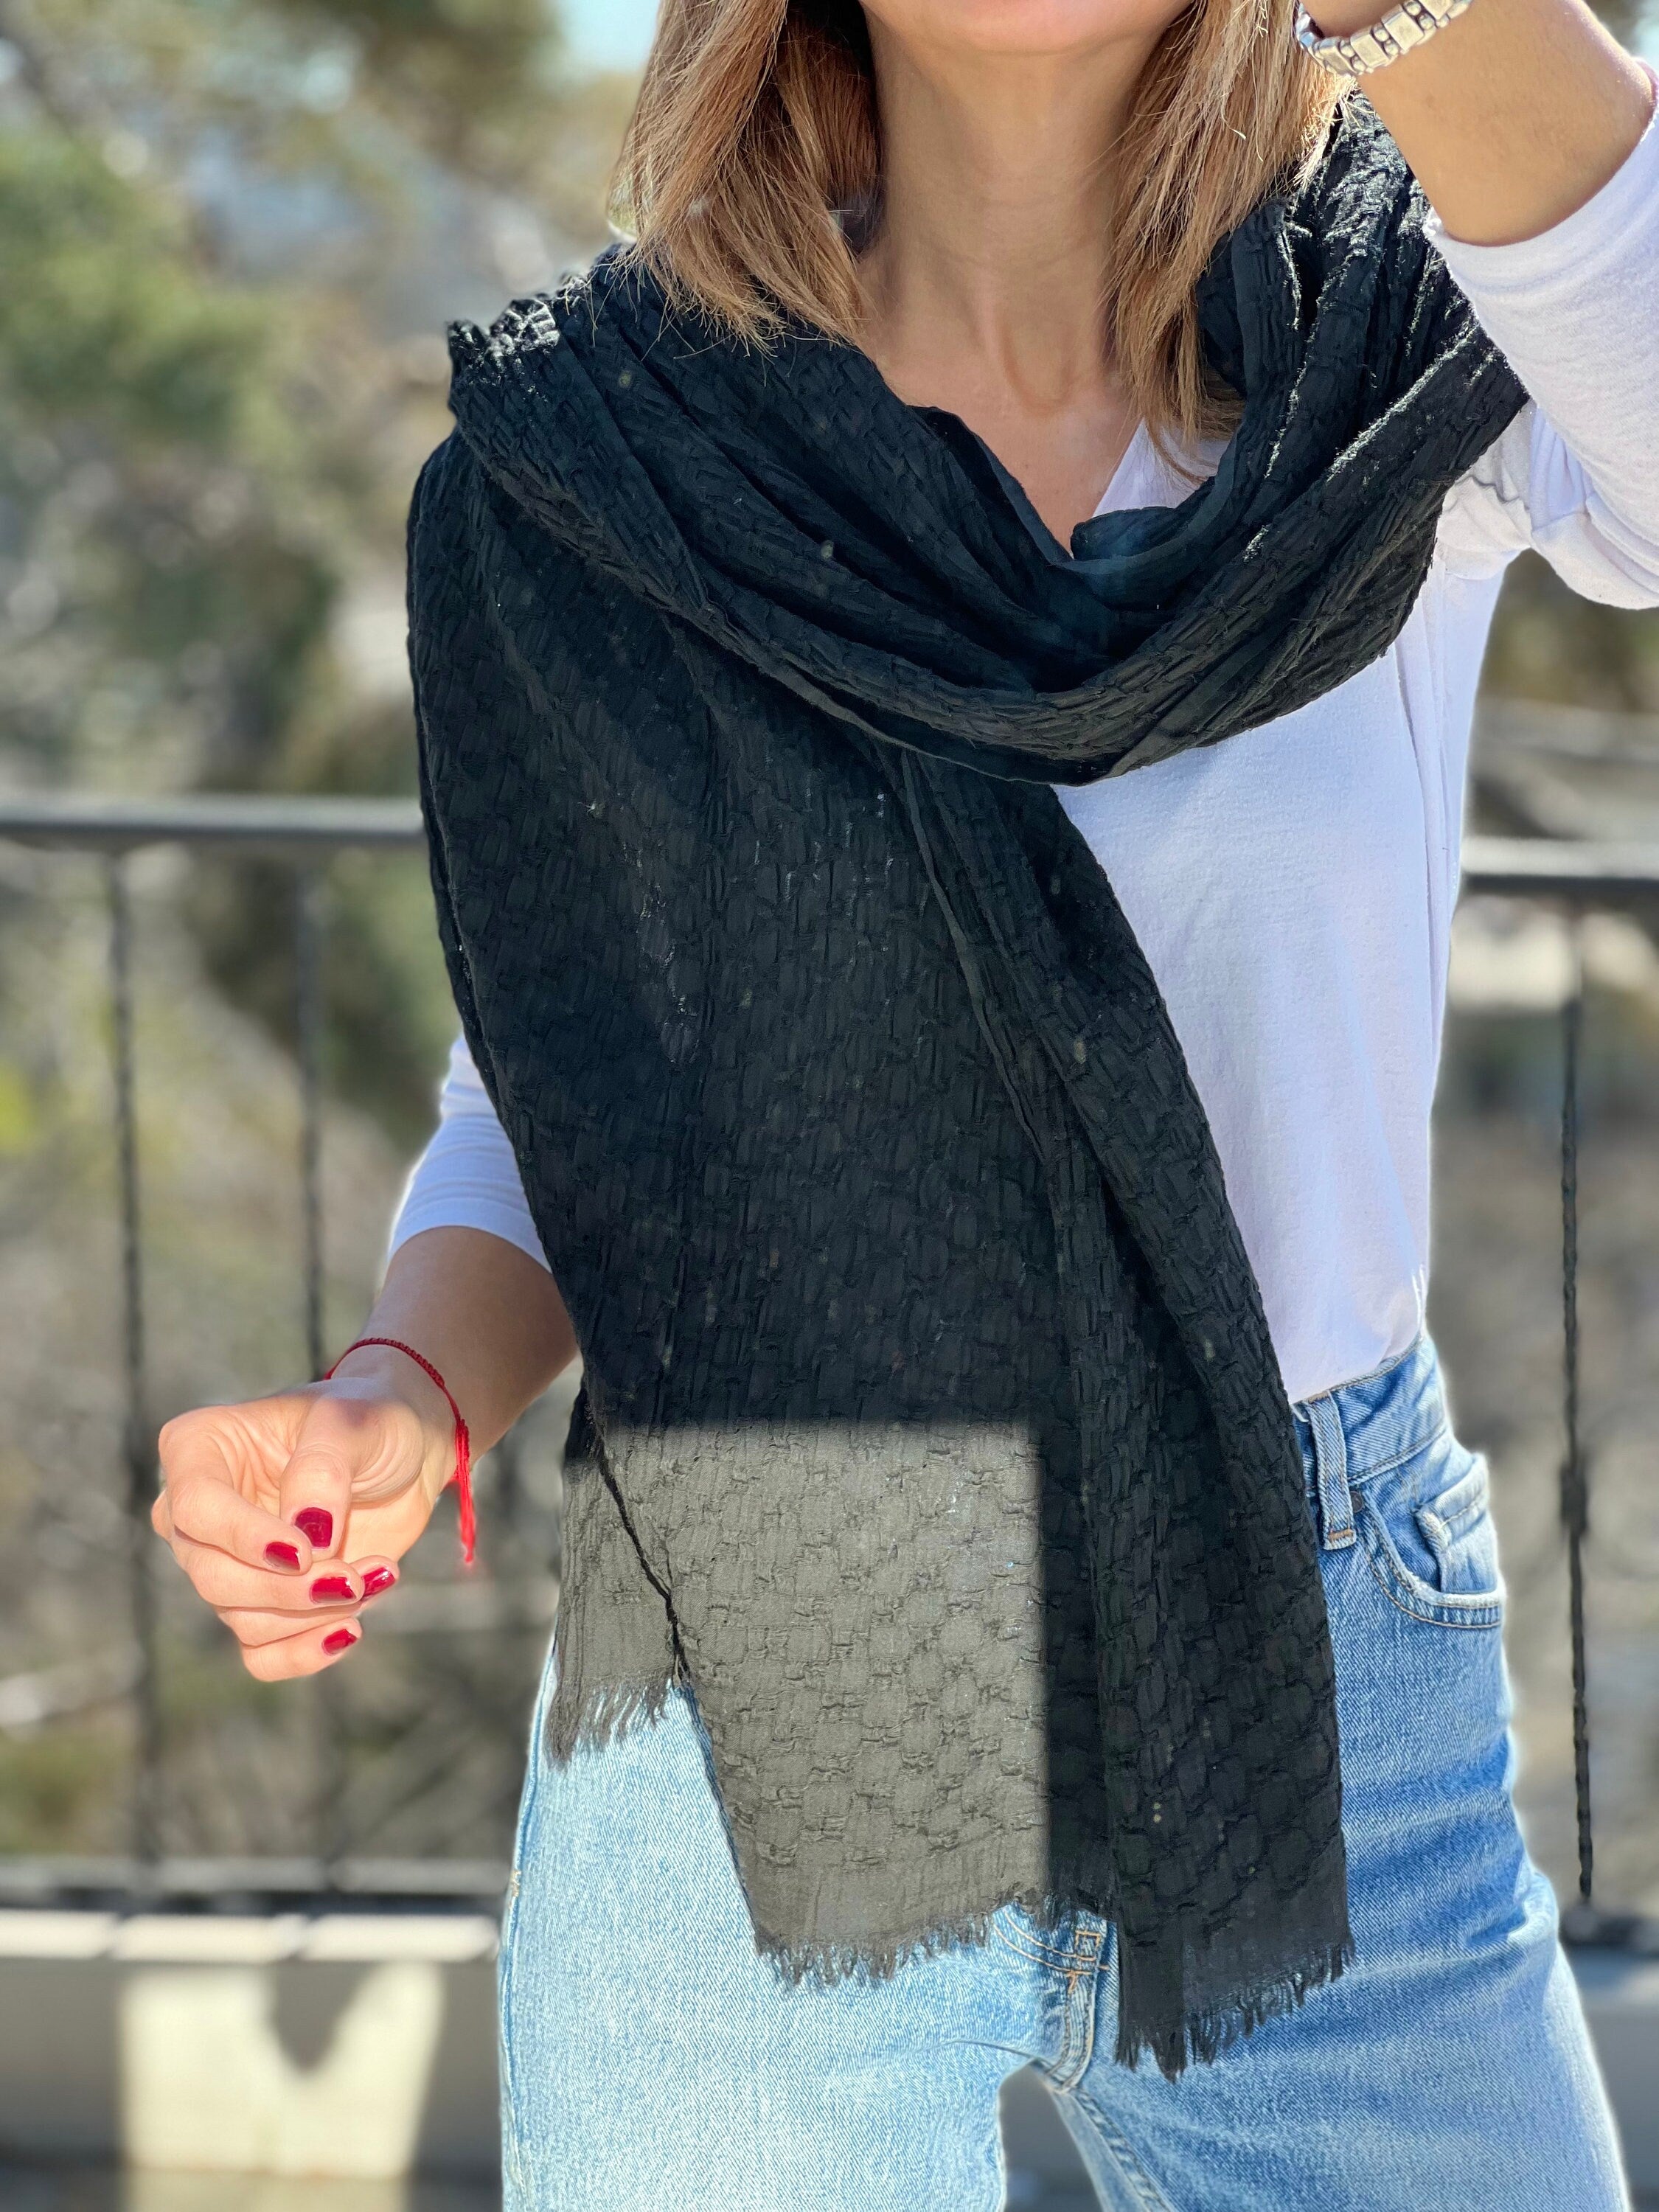 Depending on the size of your scarf, you can create different styles of scarf tops. Make sure to use a soft and smooth scarf that’ll be comfortable on your skin; a silk scarf is usually used.